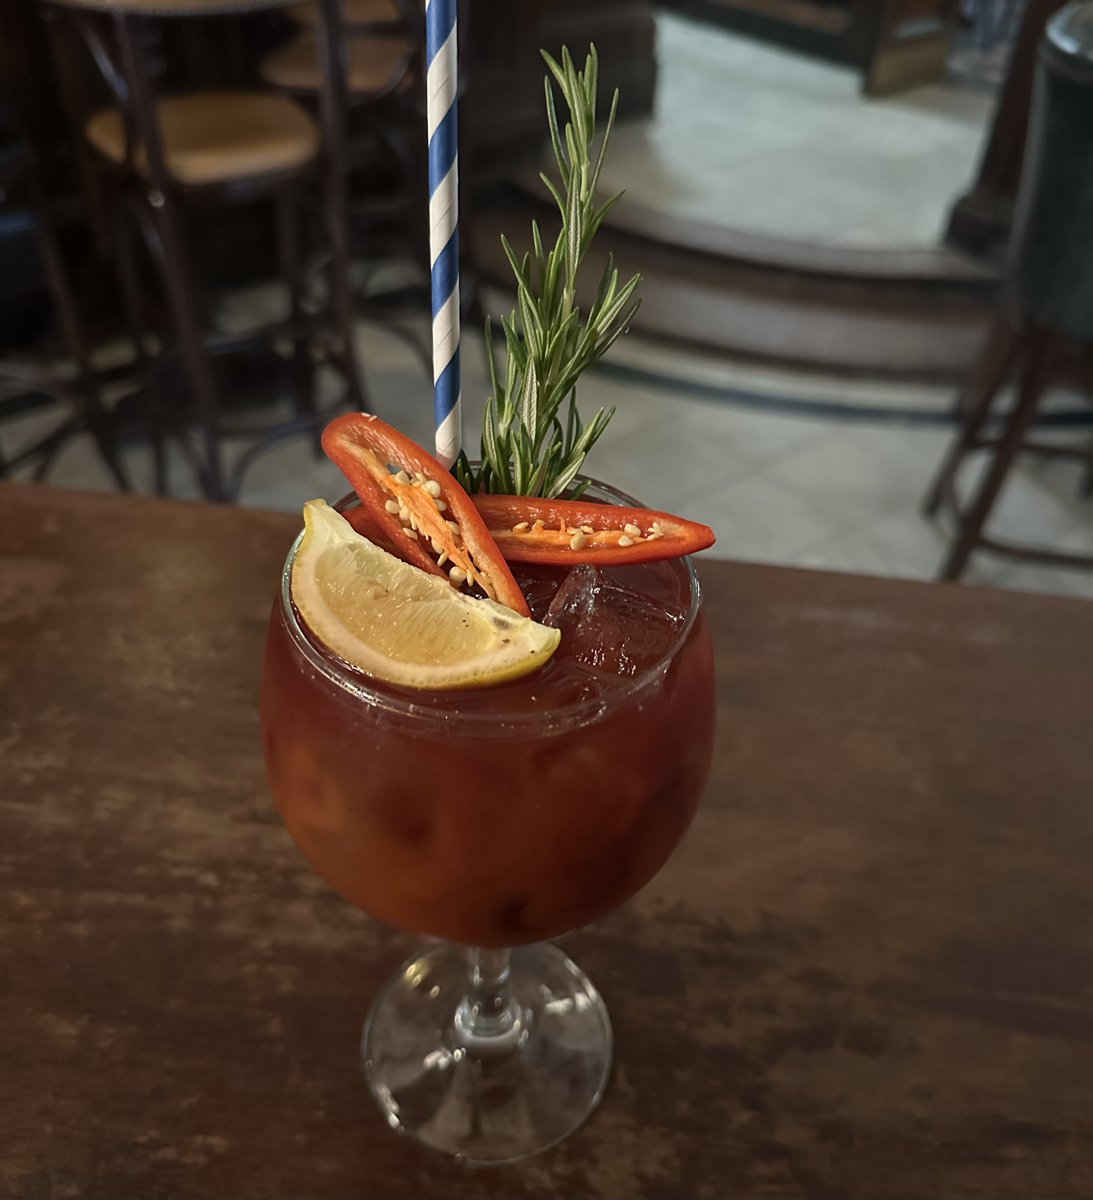 It’s the bank holiday! Which can only mean Bloody Mary’s to cure those hangovers.
.
#bloodymary #bloodymarycocktail #bloodymarys #cocktails #hangovercures #bankholidayblues